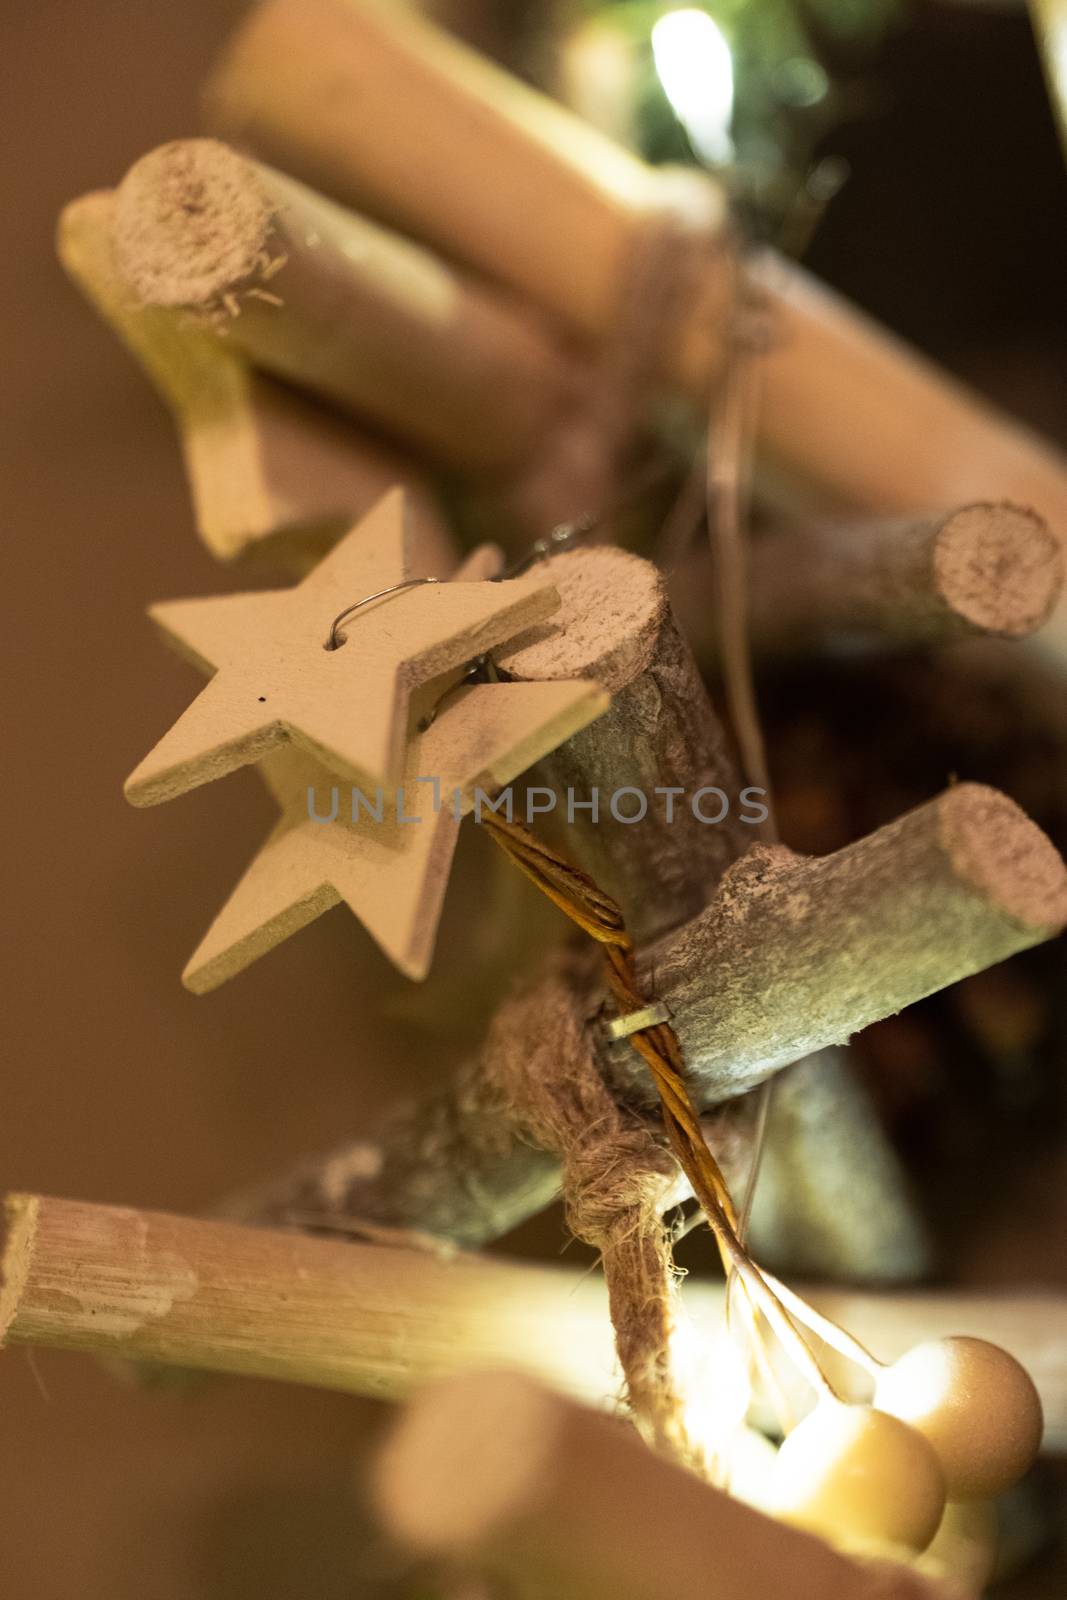 A wooden star shaped Christmas Tree Decoration hanging from a tree